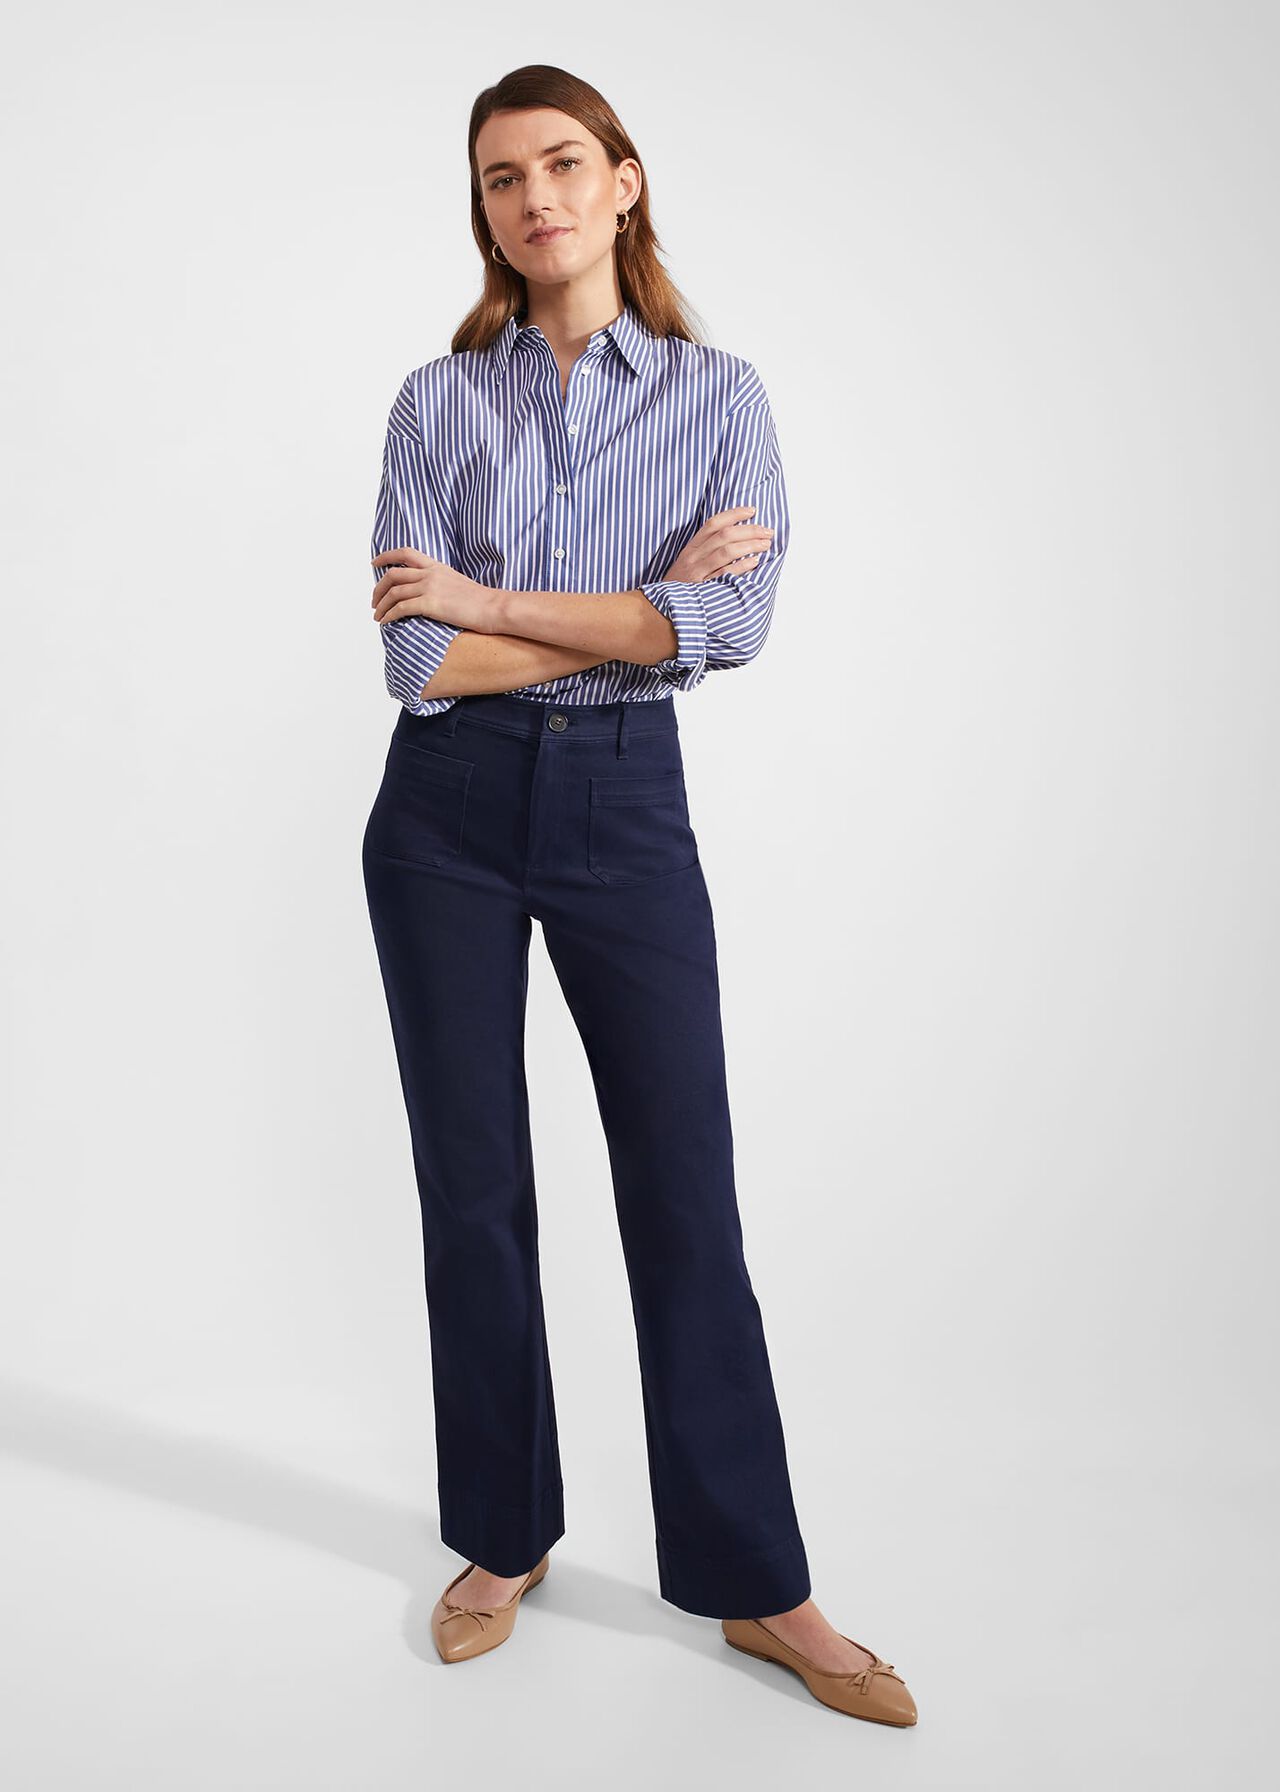 Thursday's Workwear Report: Editor High-Waisted Trouser Flare Pant 